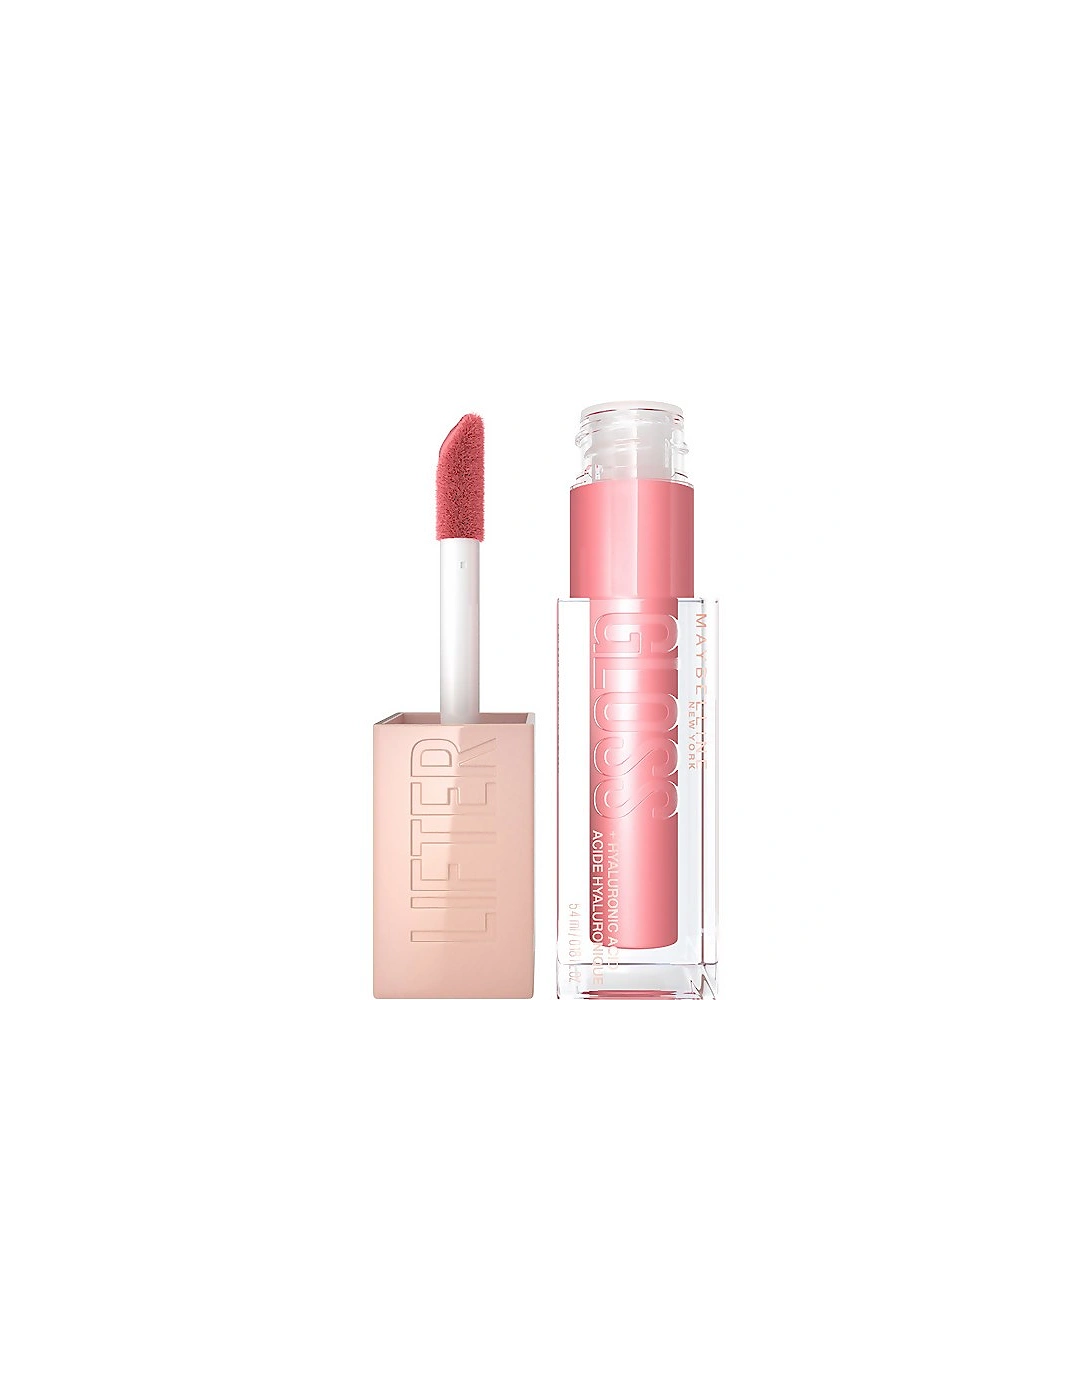 Lifter Gloss Hydrating Lip Gloss with Hyaluronic Acid 004 Silk, 2 of 1